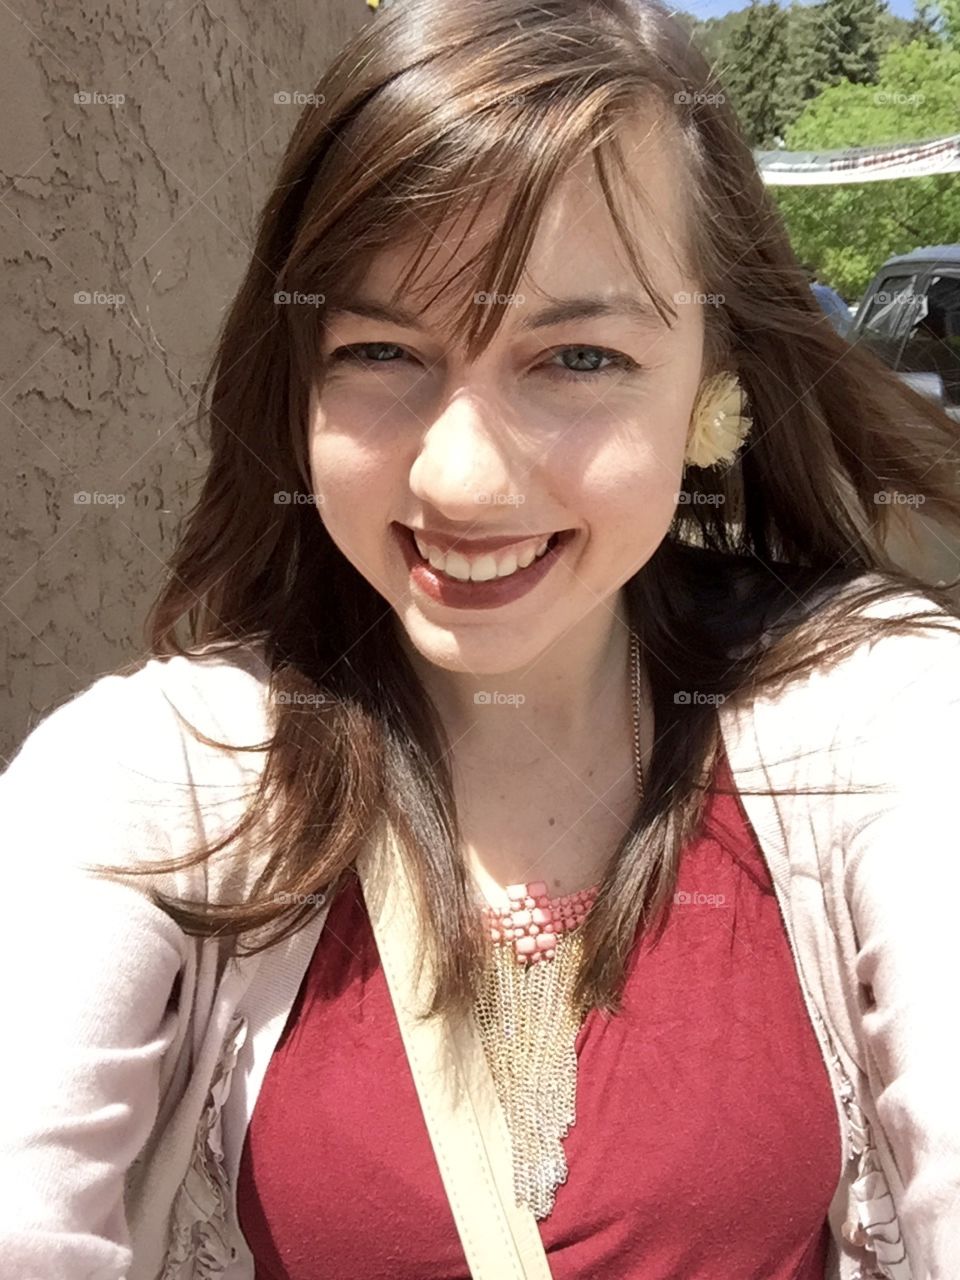 Walking back to Summit Ministries in Manitou Springs on a gorgeous May Sunday after mass in a charming little mountain chapel. That smile is fueled by the joy of the Lord!